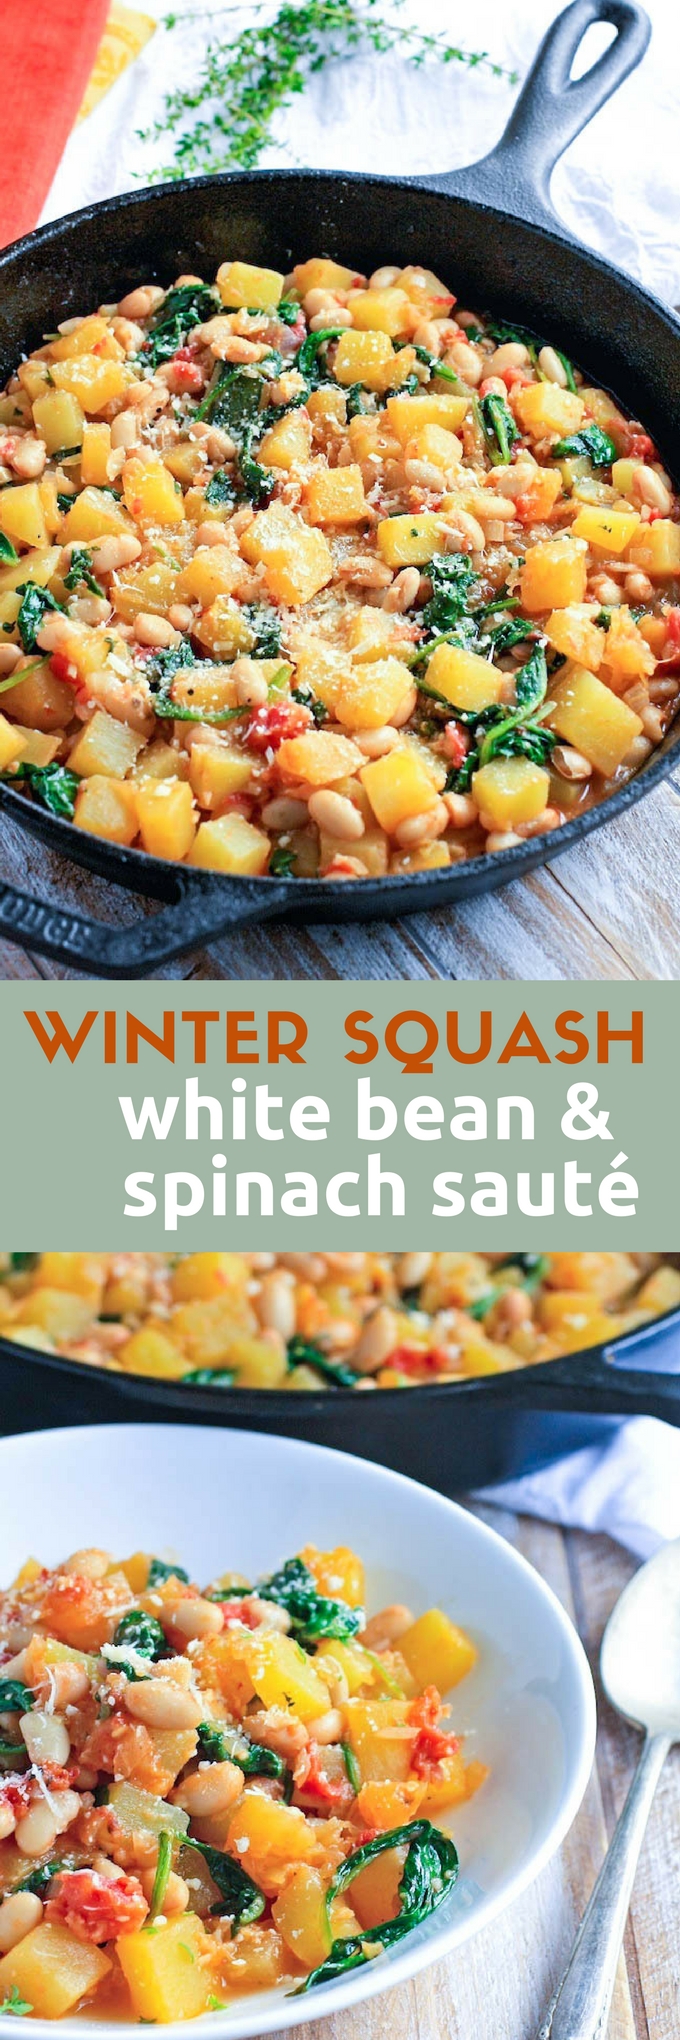 Winter Squash, White Bean & Spinach Sauté is a tasty meal perfect on a cold night. This winter squash dish is ideal for a Meatless Monday meal.